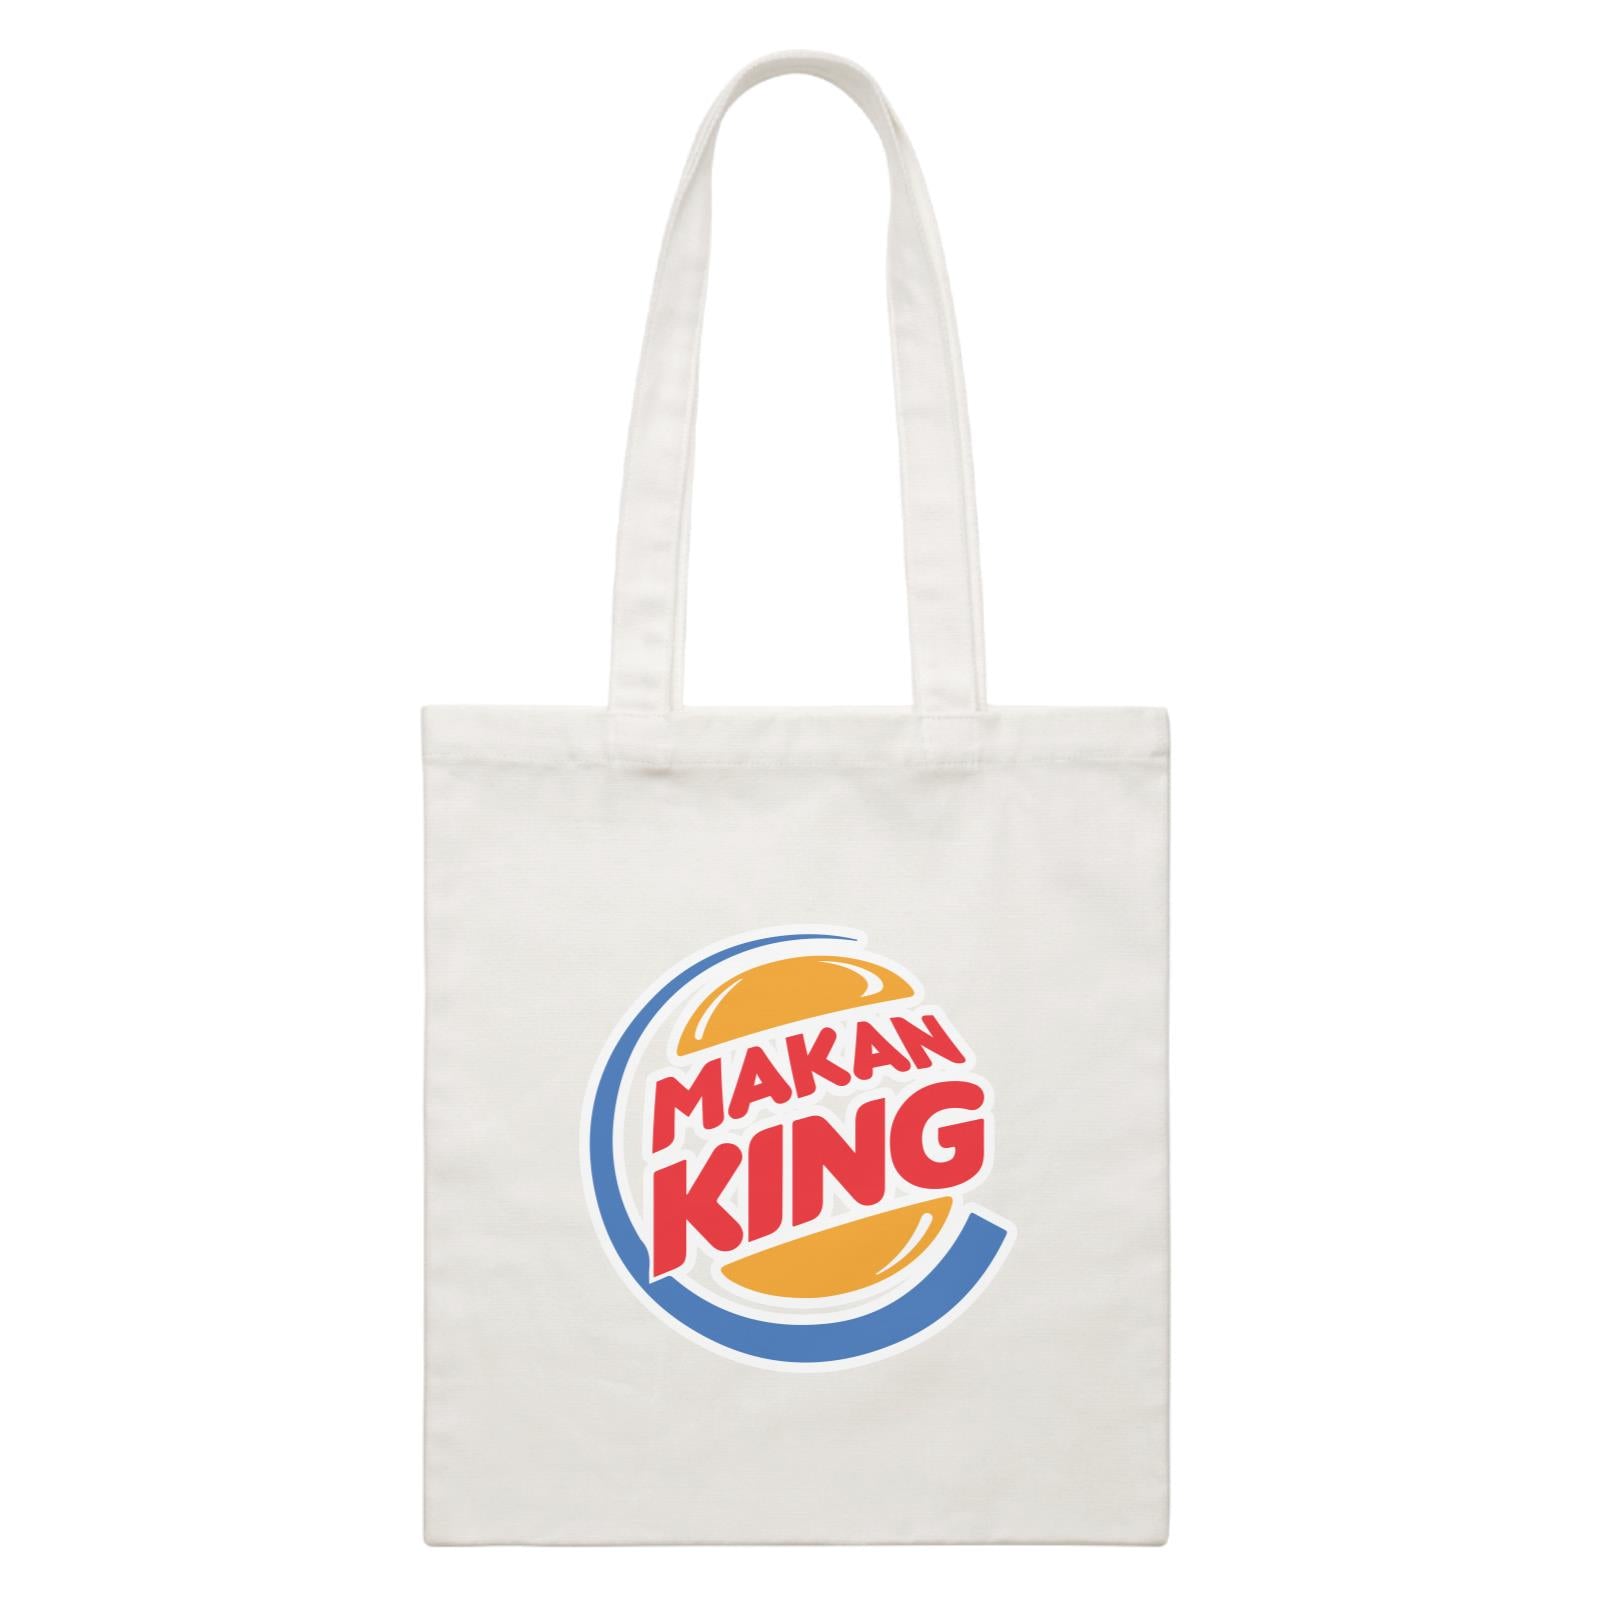 Slang Statement Makan King Accessories White Canvas Bag